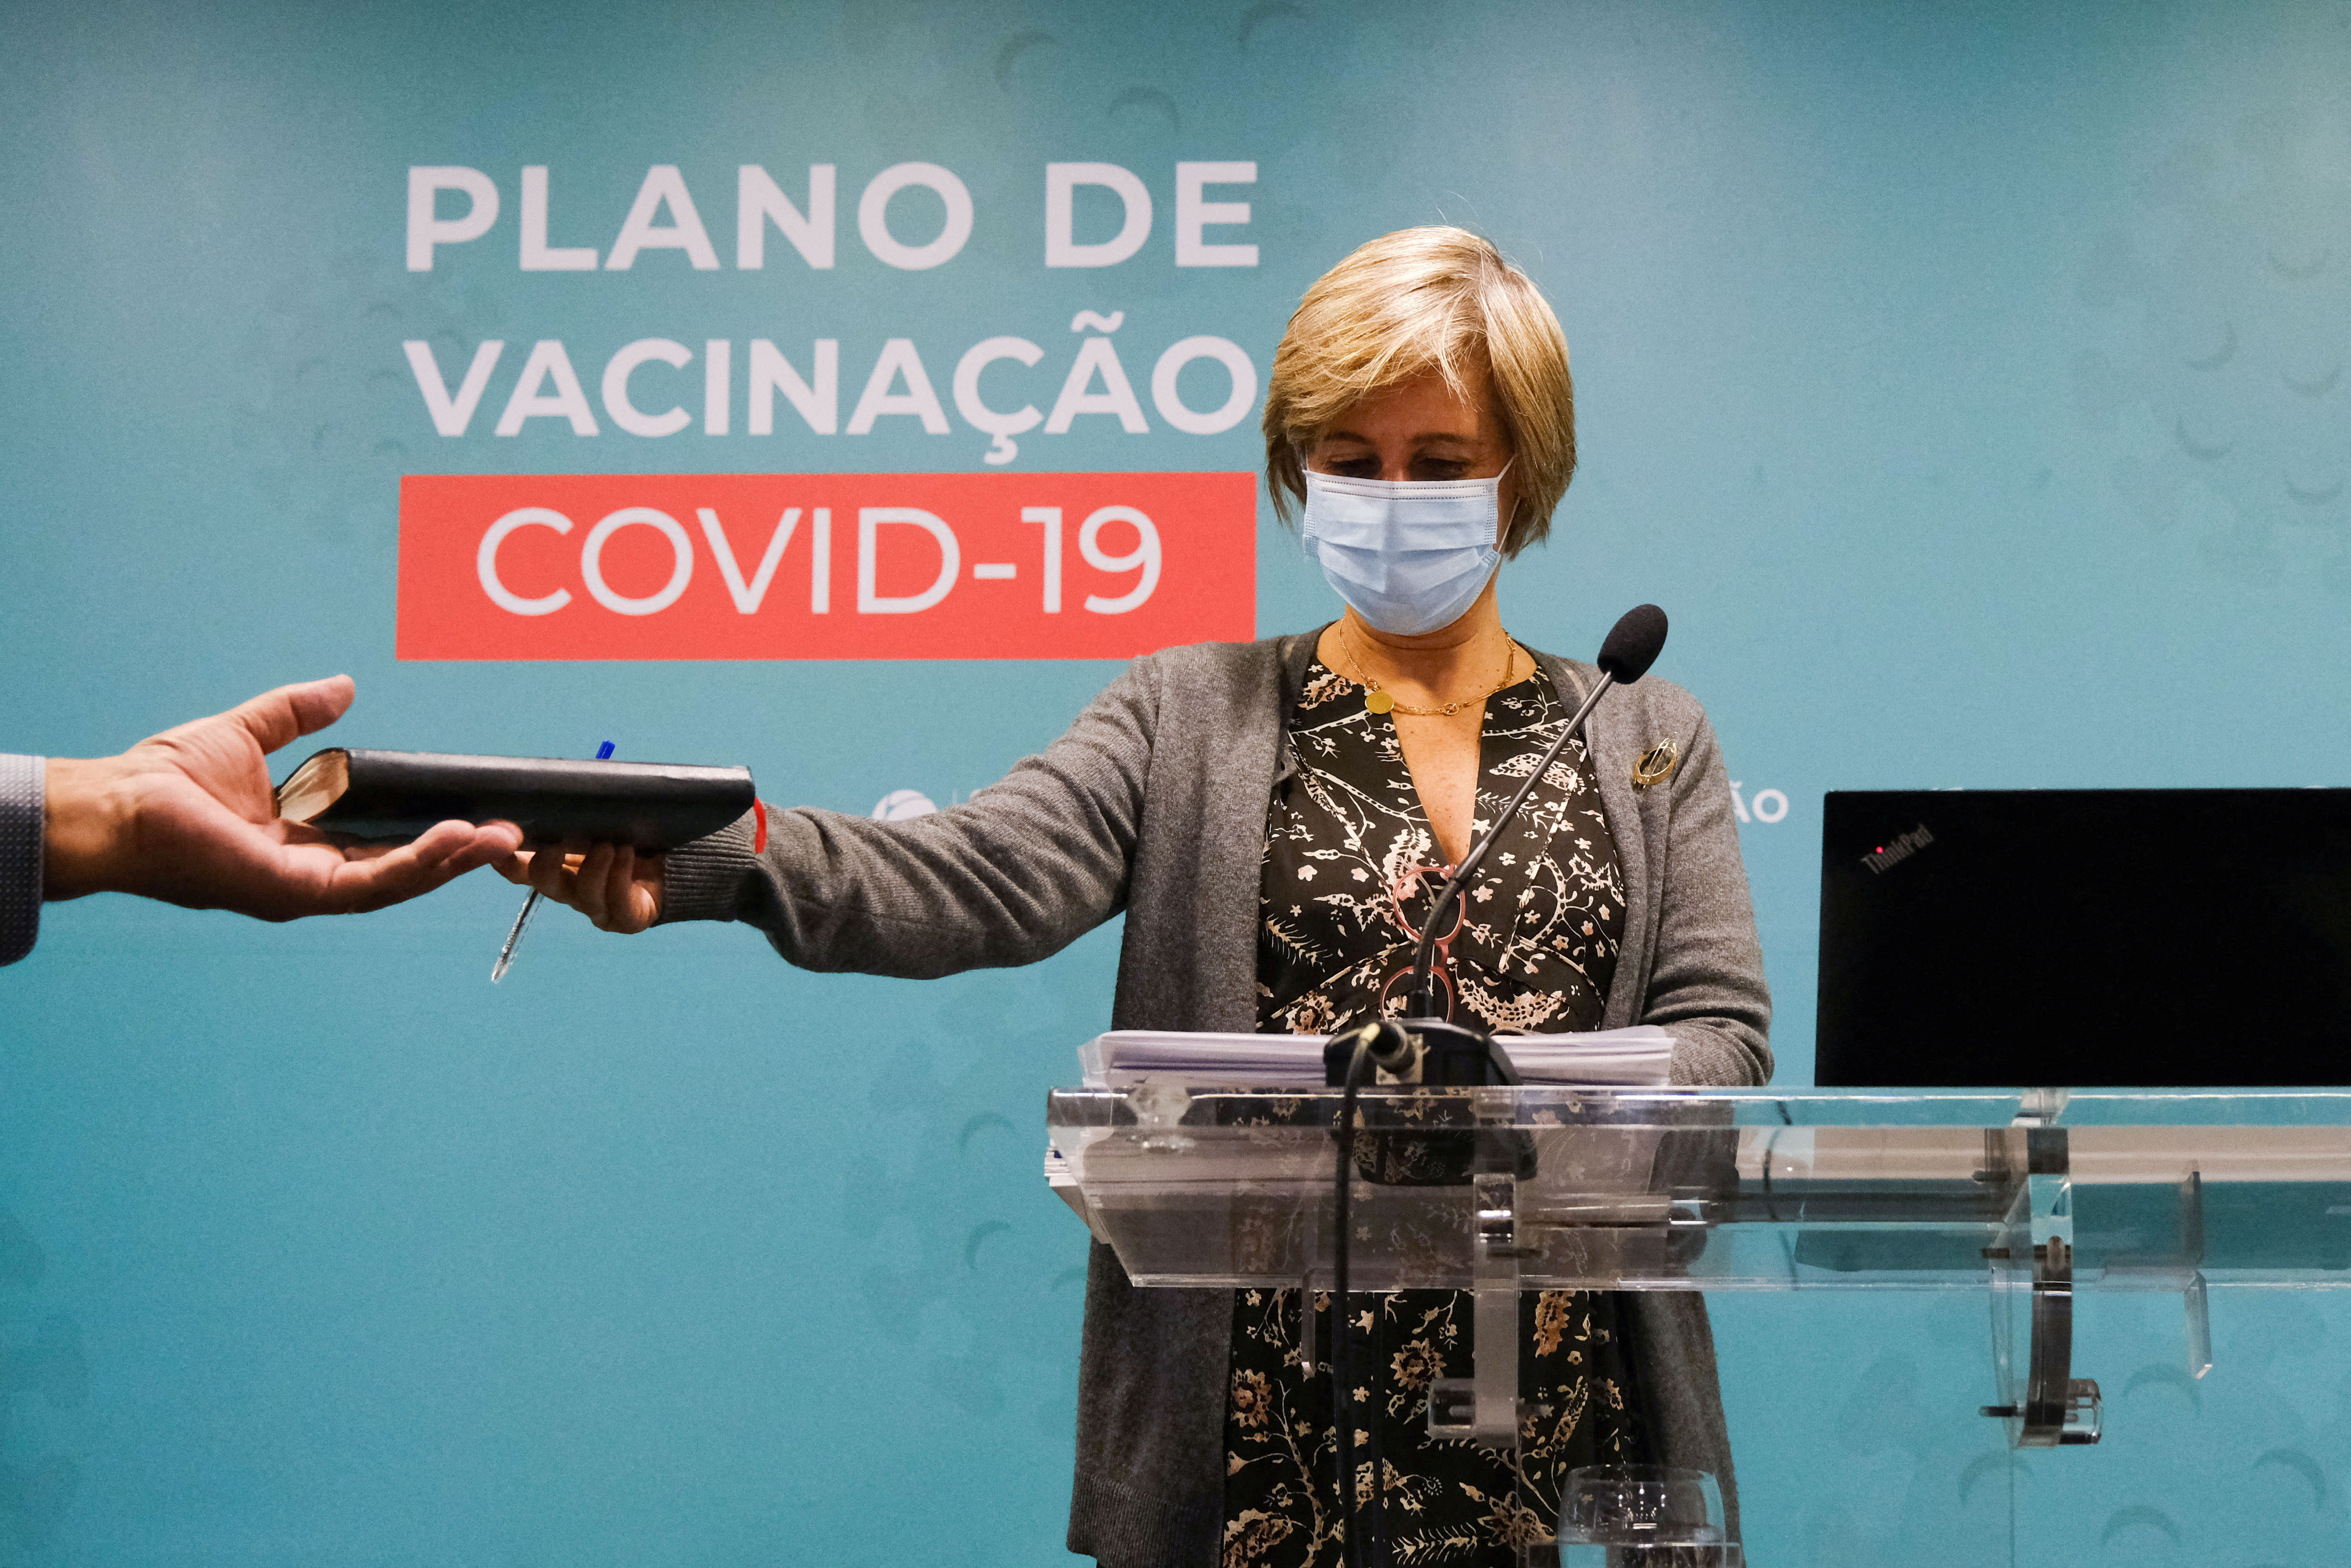 Portugal's Health Minister Marta Temido arrives to a news conference regarding the coronavirus situation in Lisbon